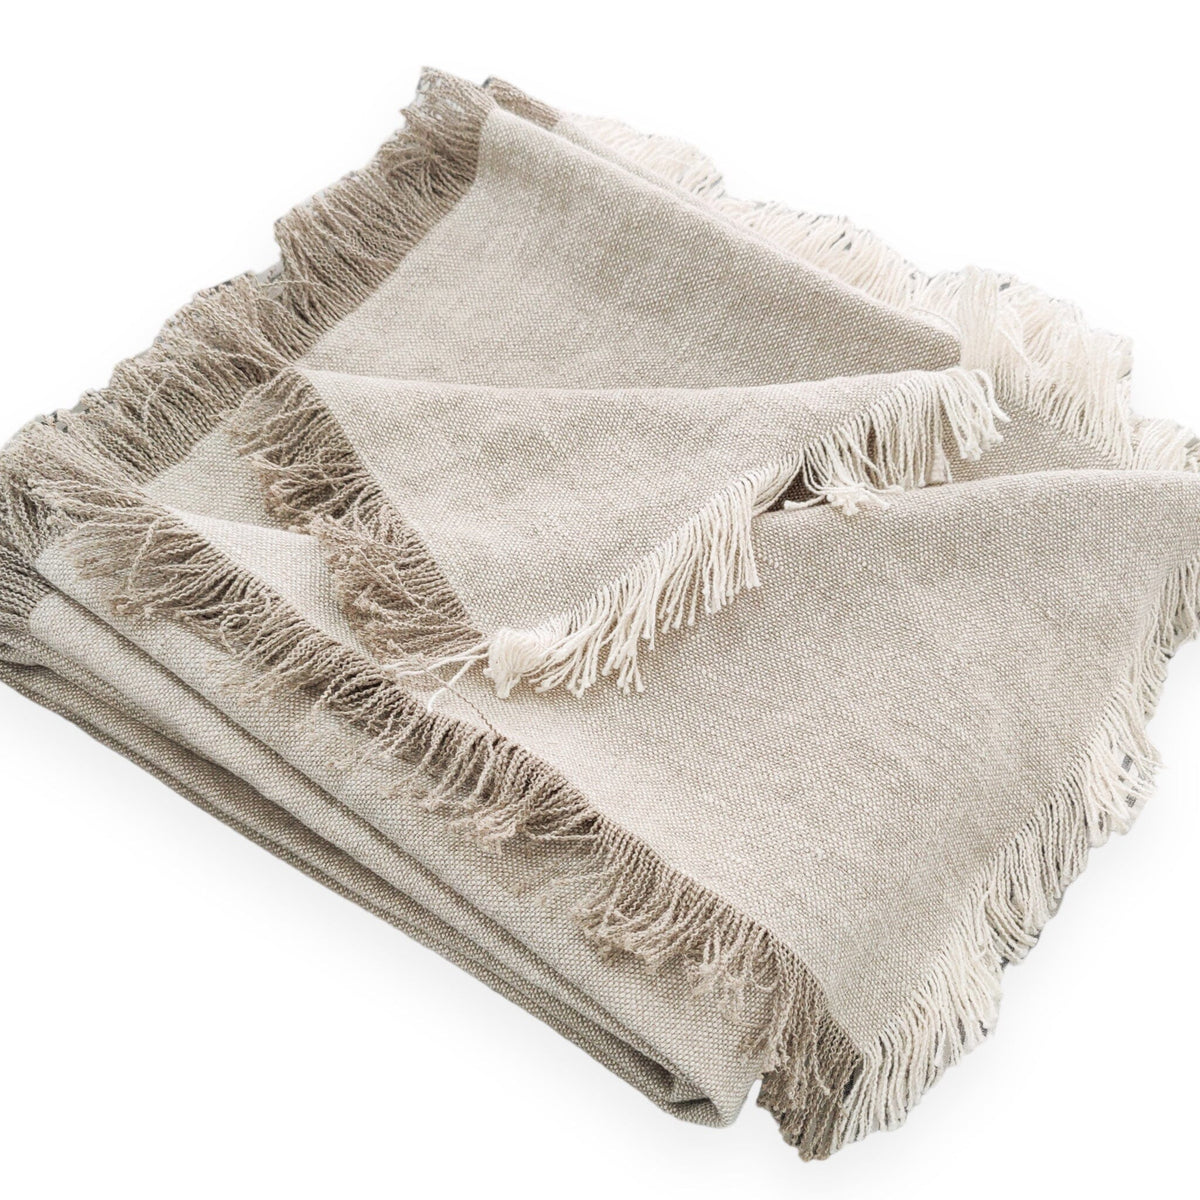 Riva French Linen Throw- Oatmeal/Natural Wander & Wild 